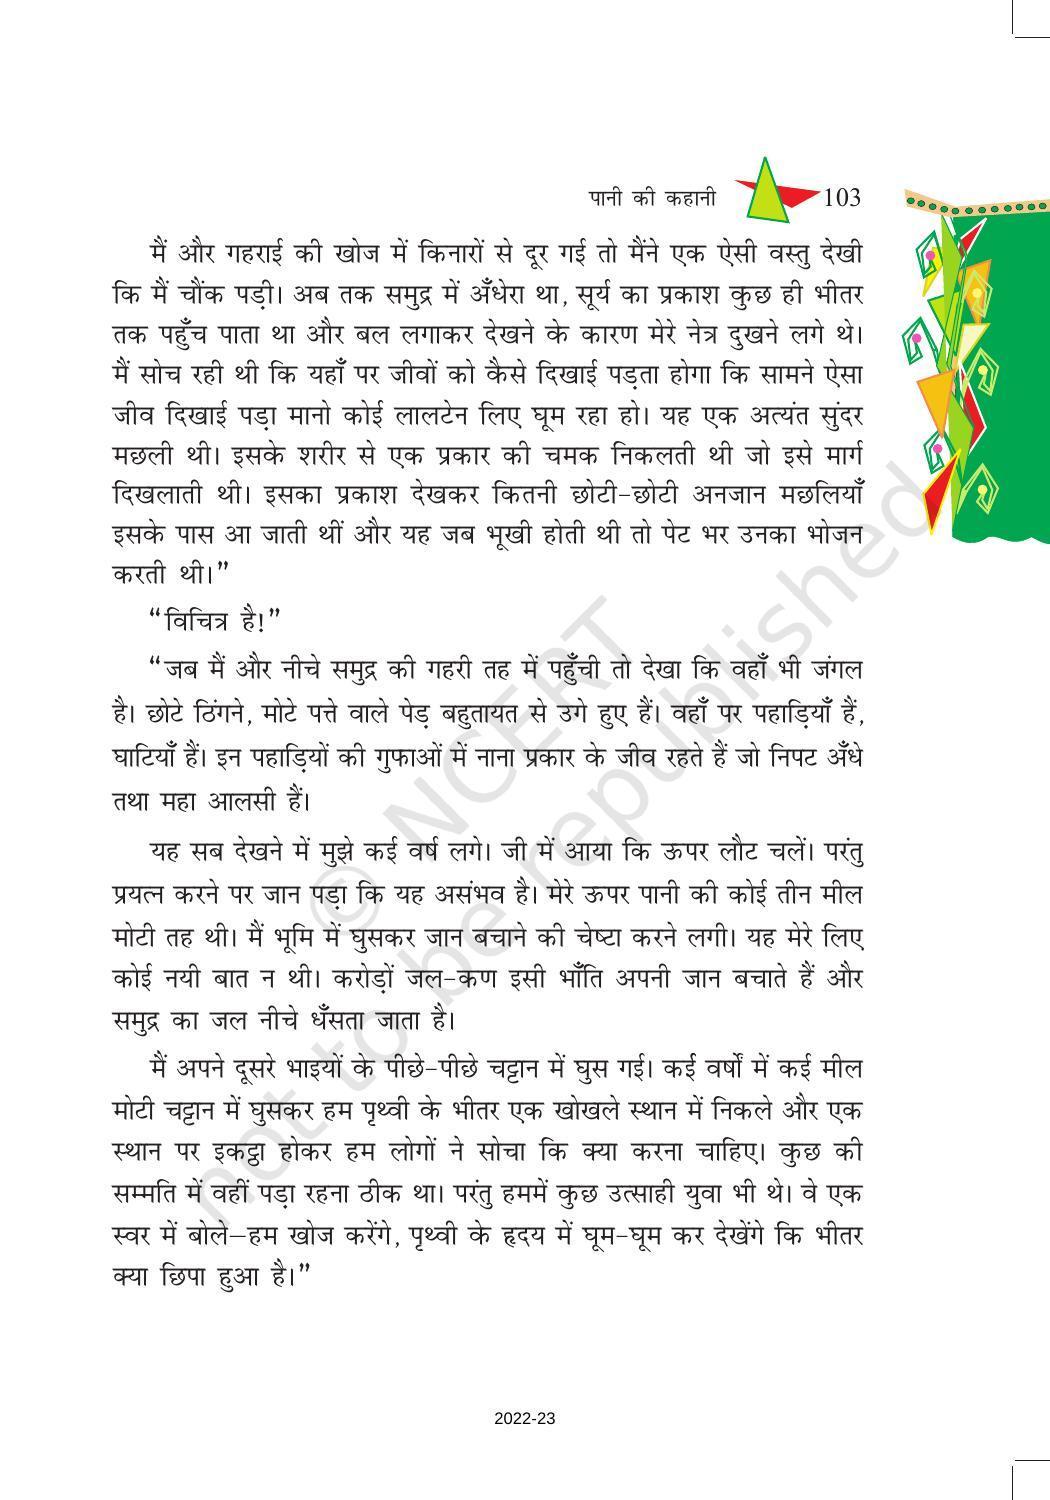 NCERT Book for Class 8 Hindi Vasant Chapter 16 पानी की कहानी - Page 6